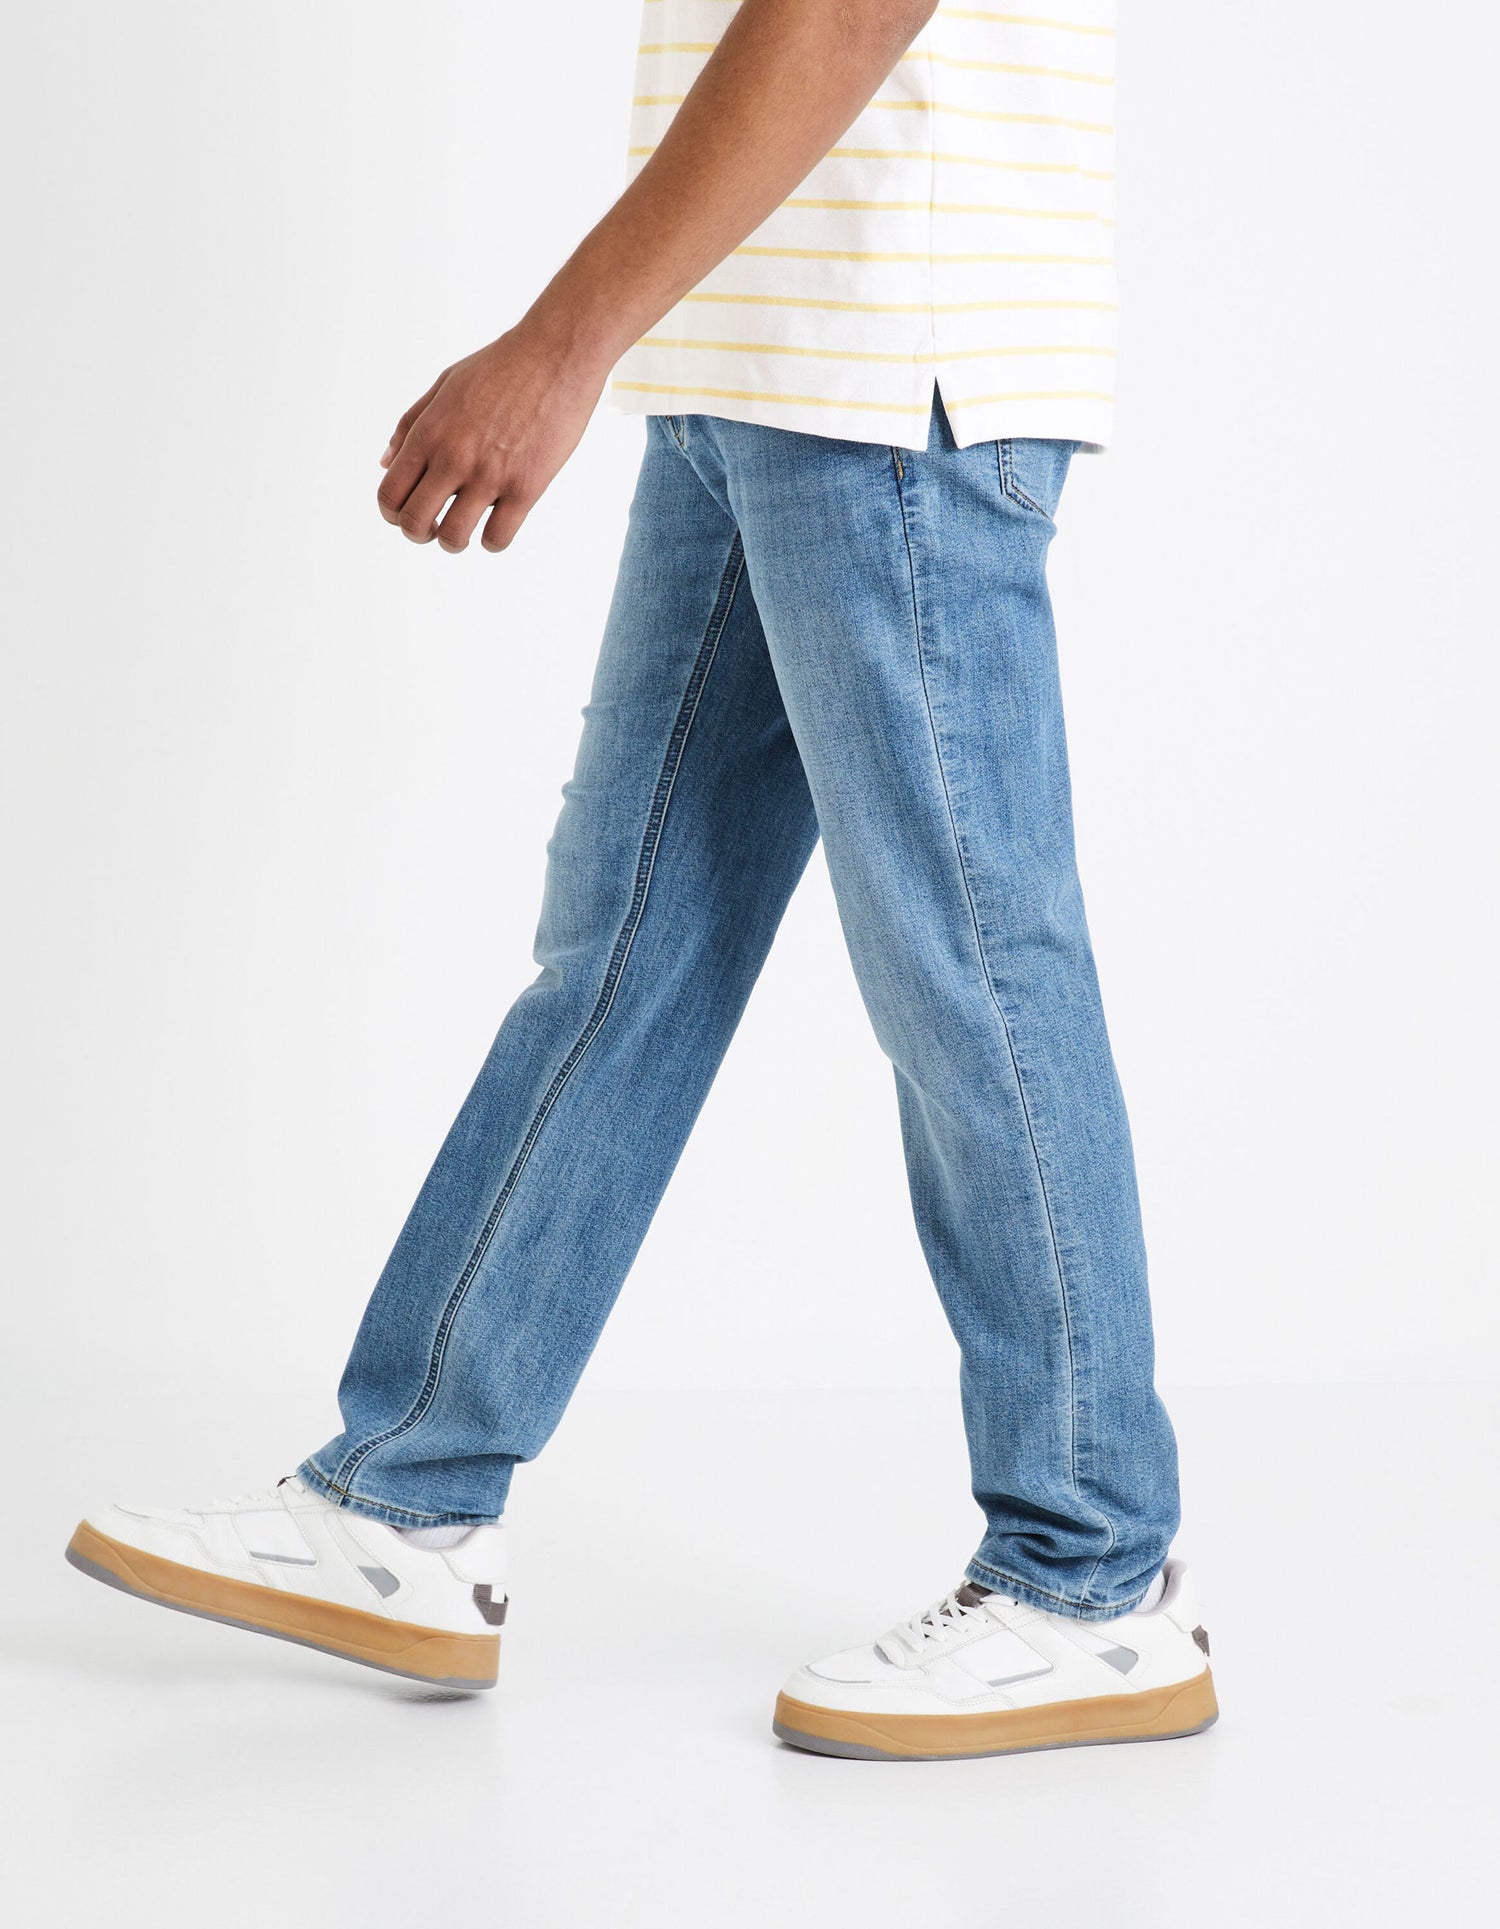 C15 3-Length Straight Jeans - Bleached_DOKLIGHT15_BLEACHED_05